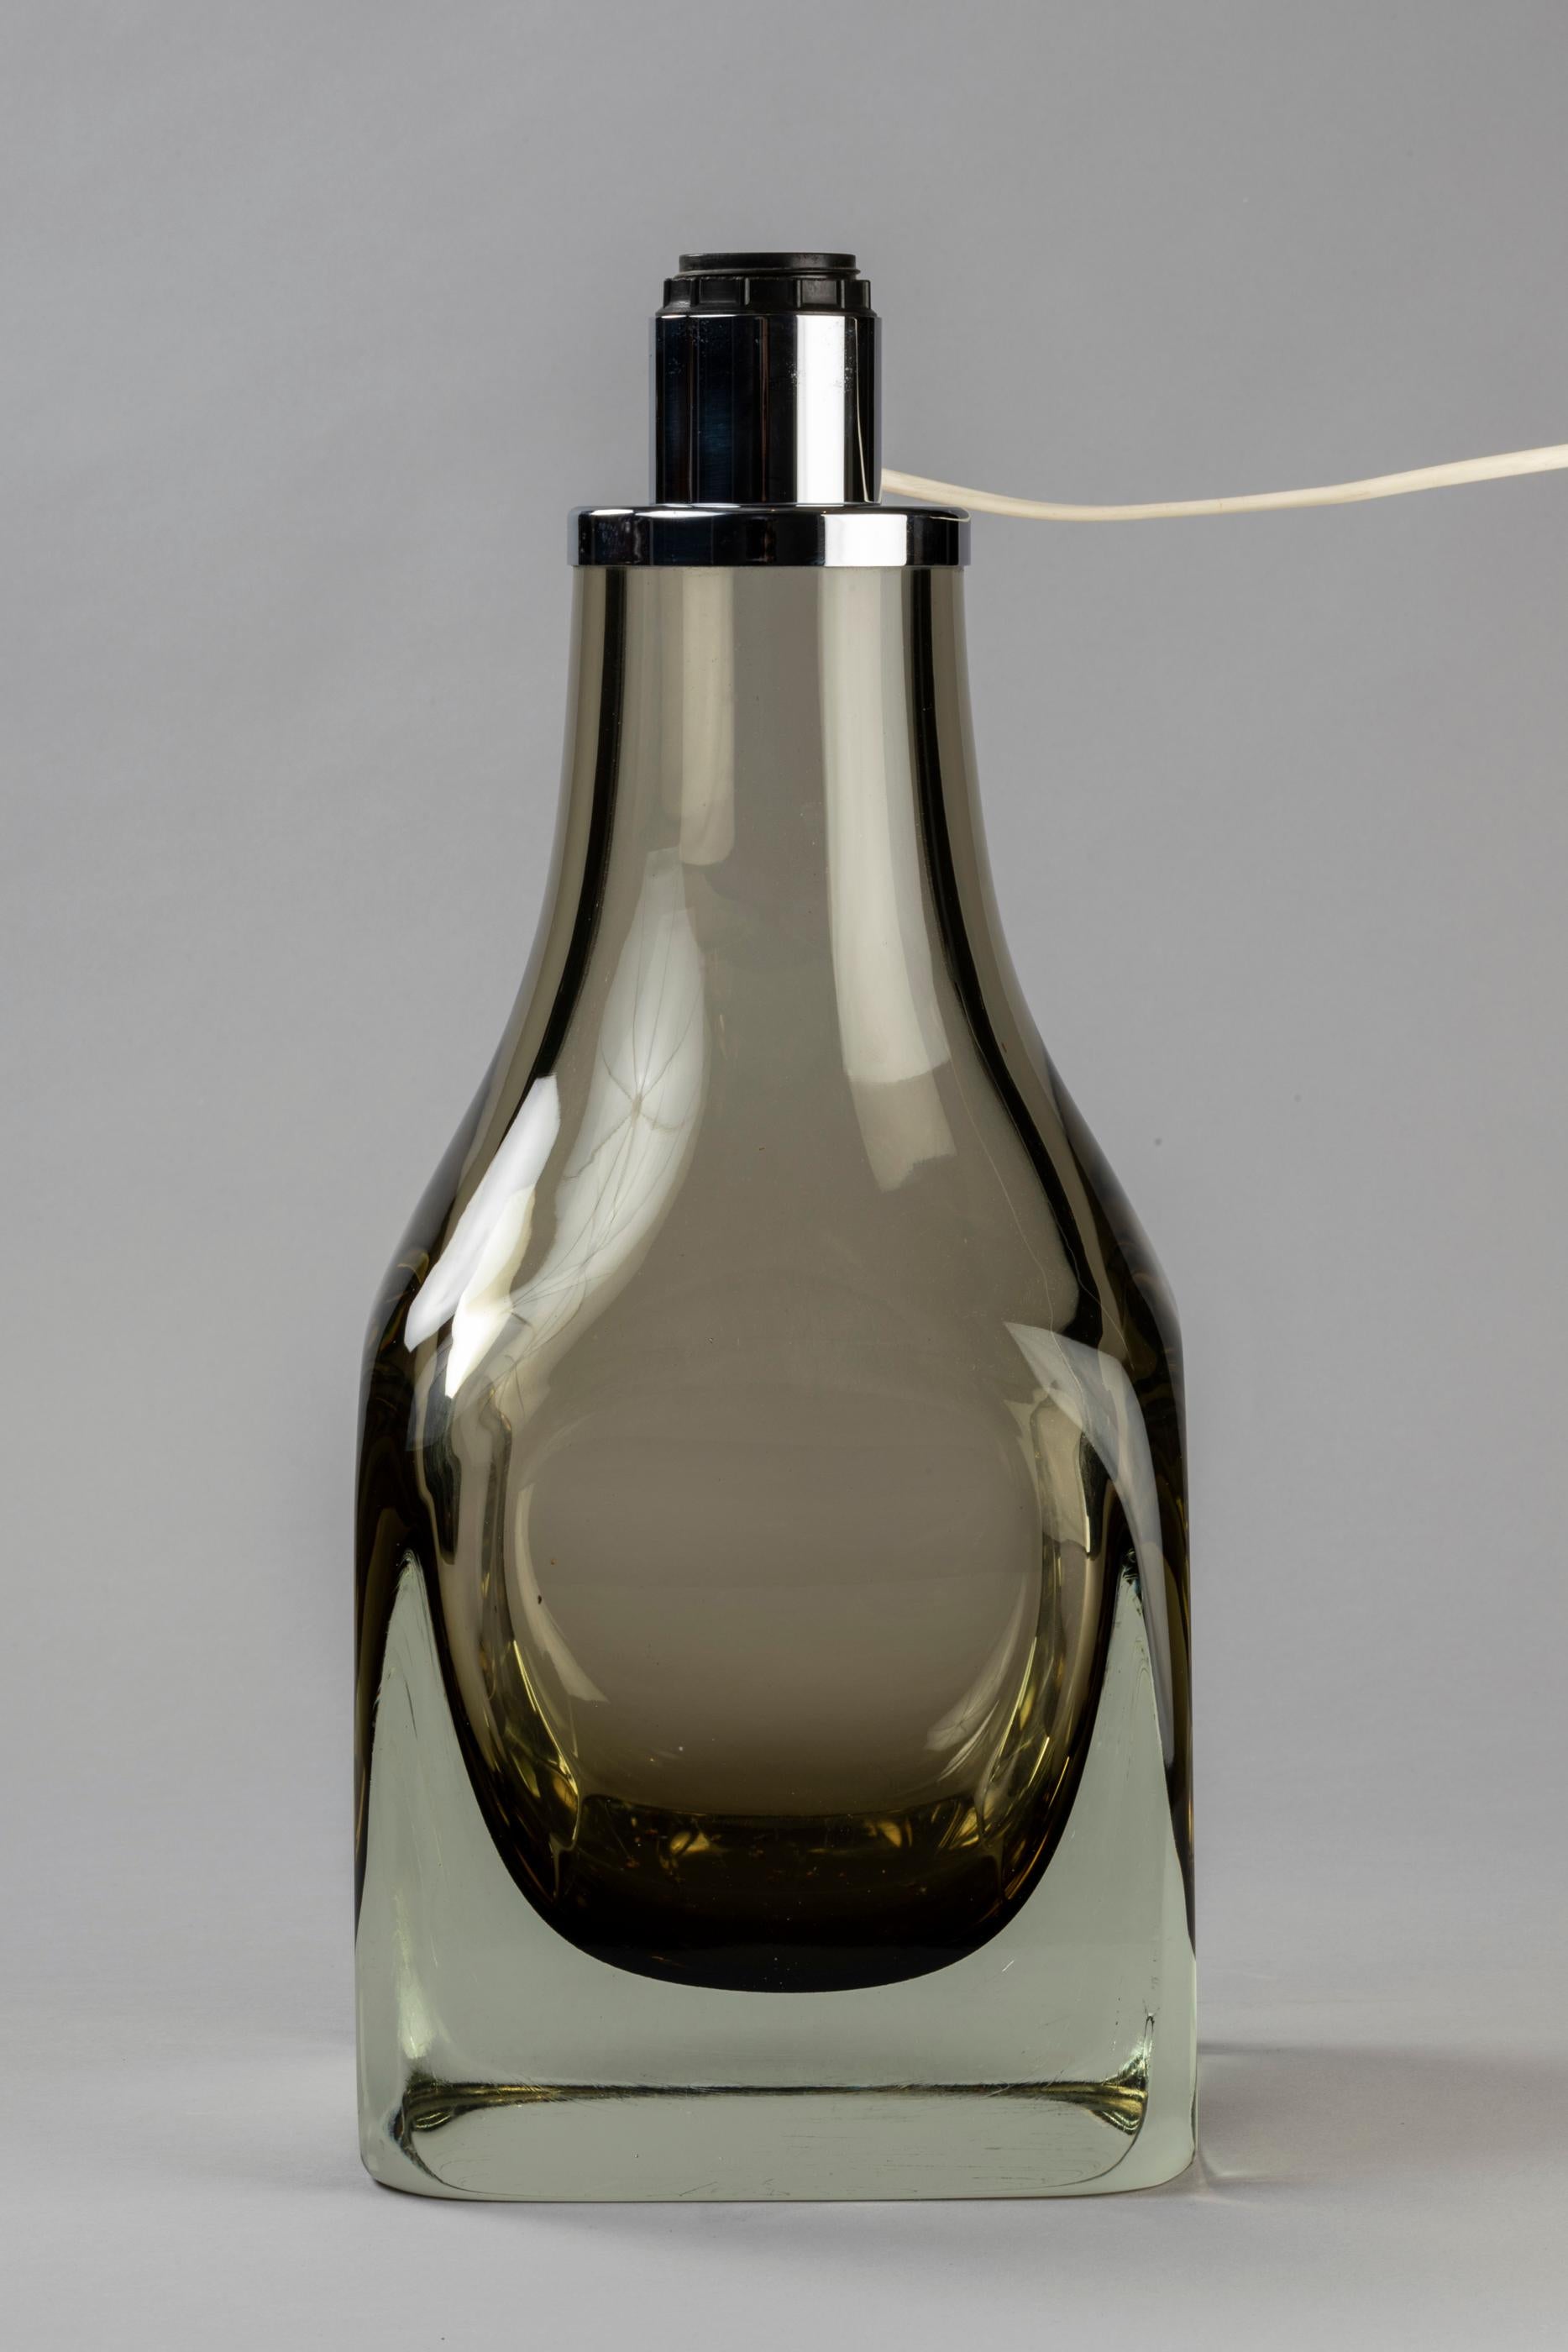 A beautiful mouth blown glass vase wish was rebuilt to table lamp in the 1960s by designer Angelo Seguso for Seguso vetri d'Arte.
A timeless style for this khaki colored lamp, full of elegance.